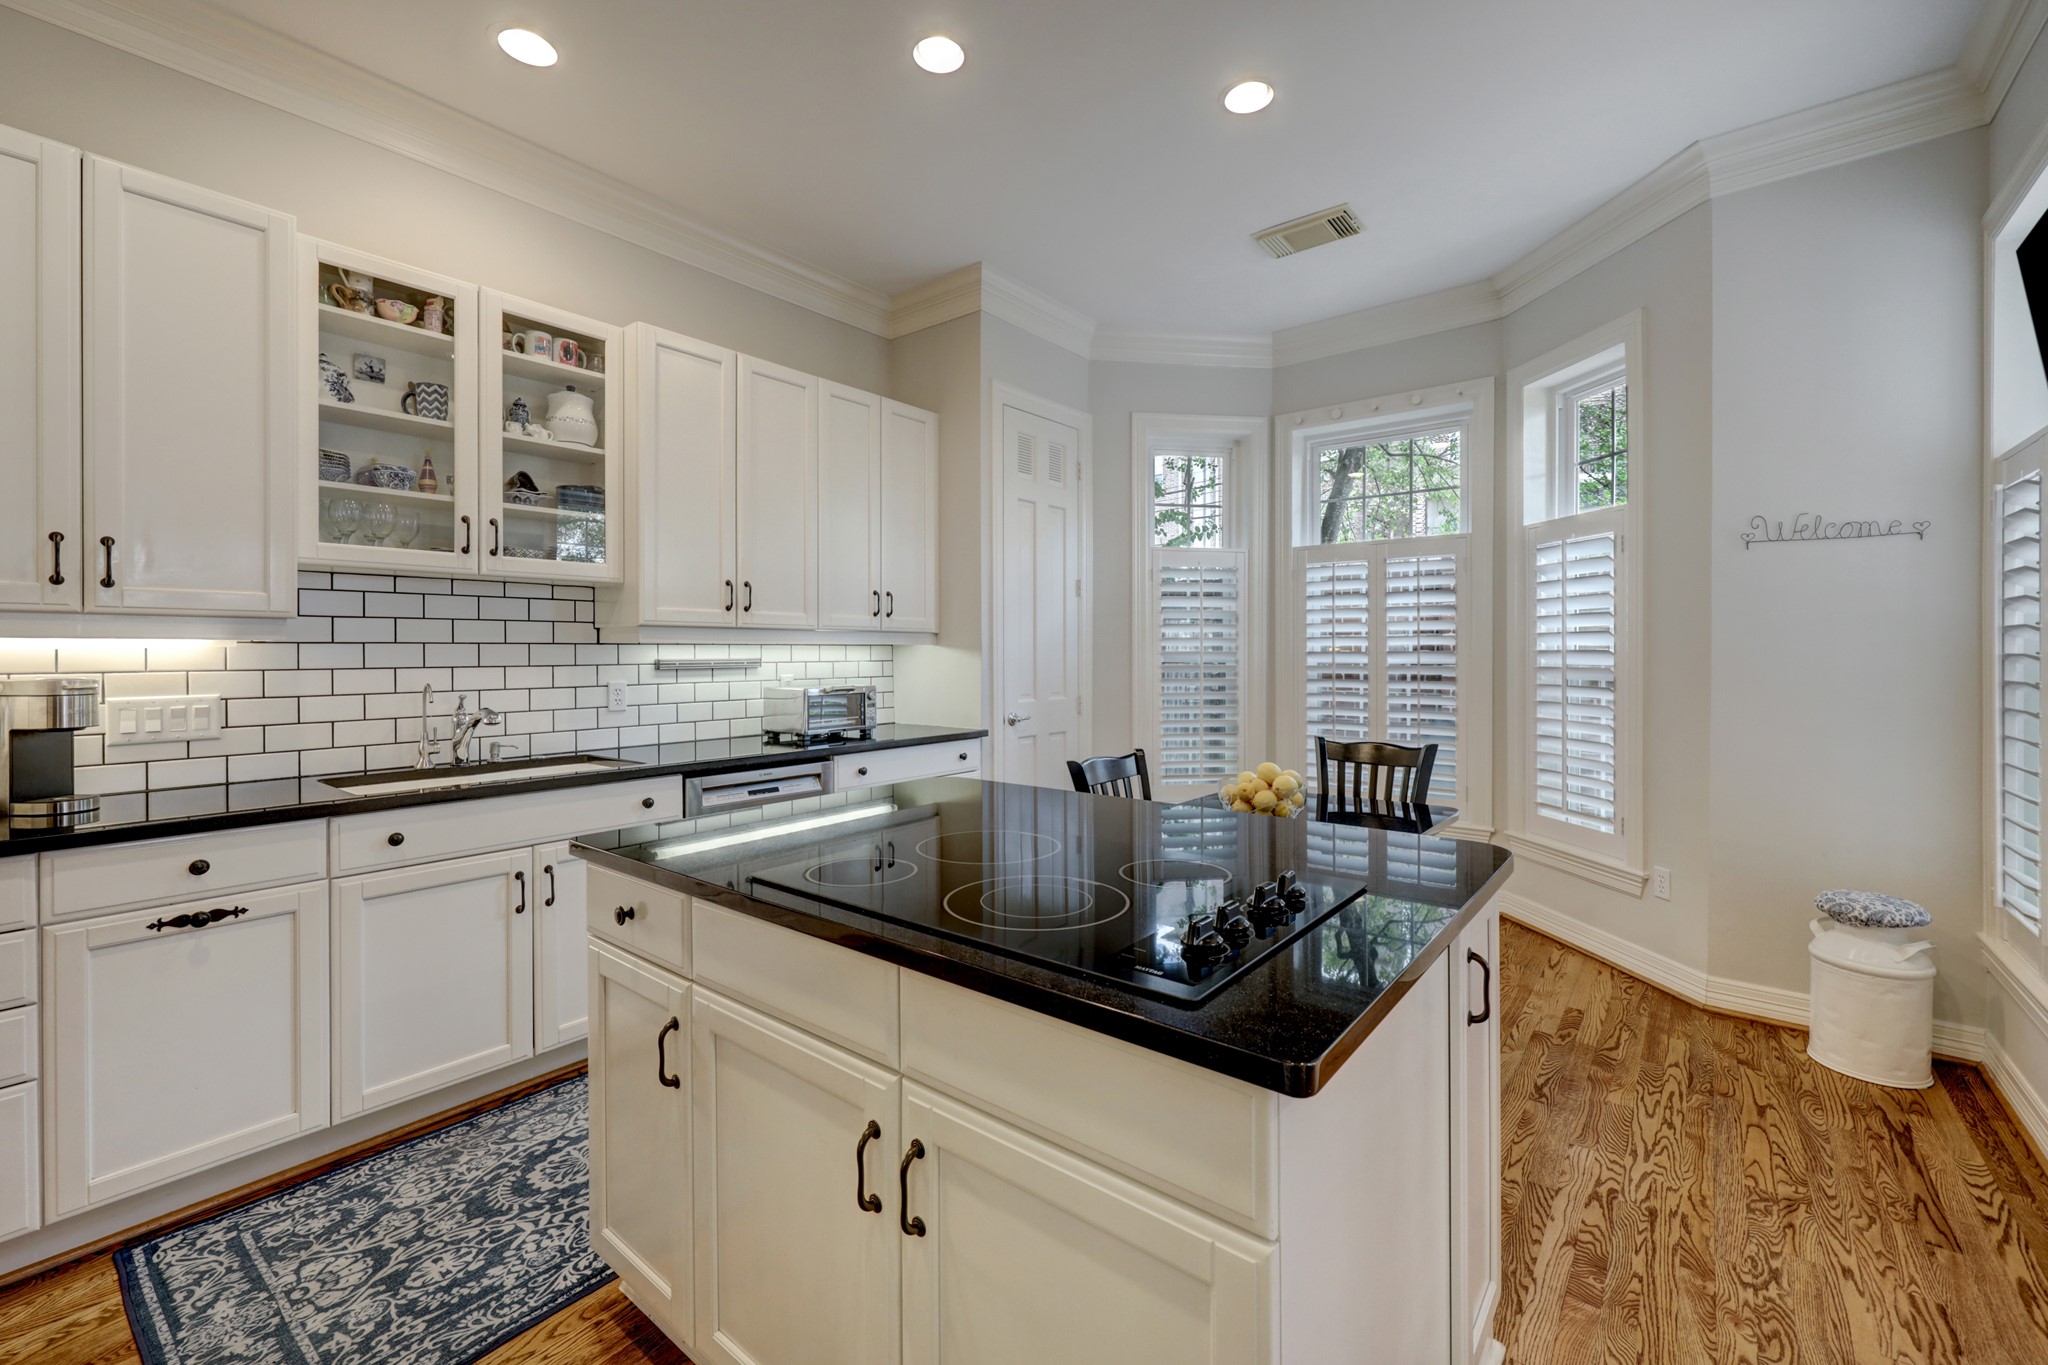 The updated kitchen features black granite countertops, white cabinetry, and striking white subway tile with black grout.  The door in the rear of the photo opens to the pantry.